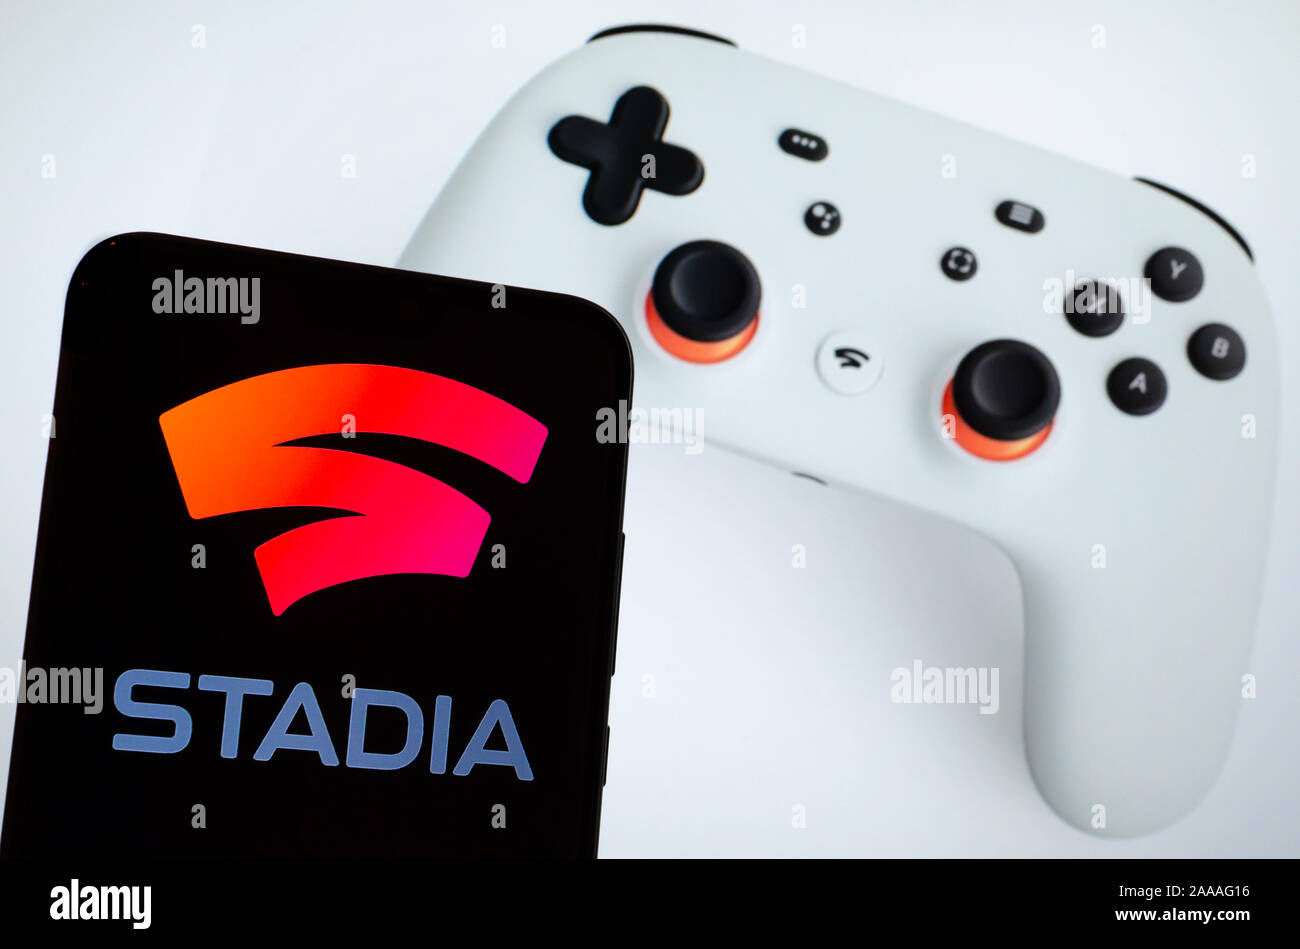 Stadia logo on a smartphone screen and white Google Stadia controller seen on the blurred background. Stock Photo